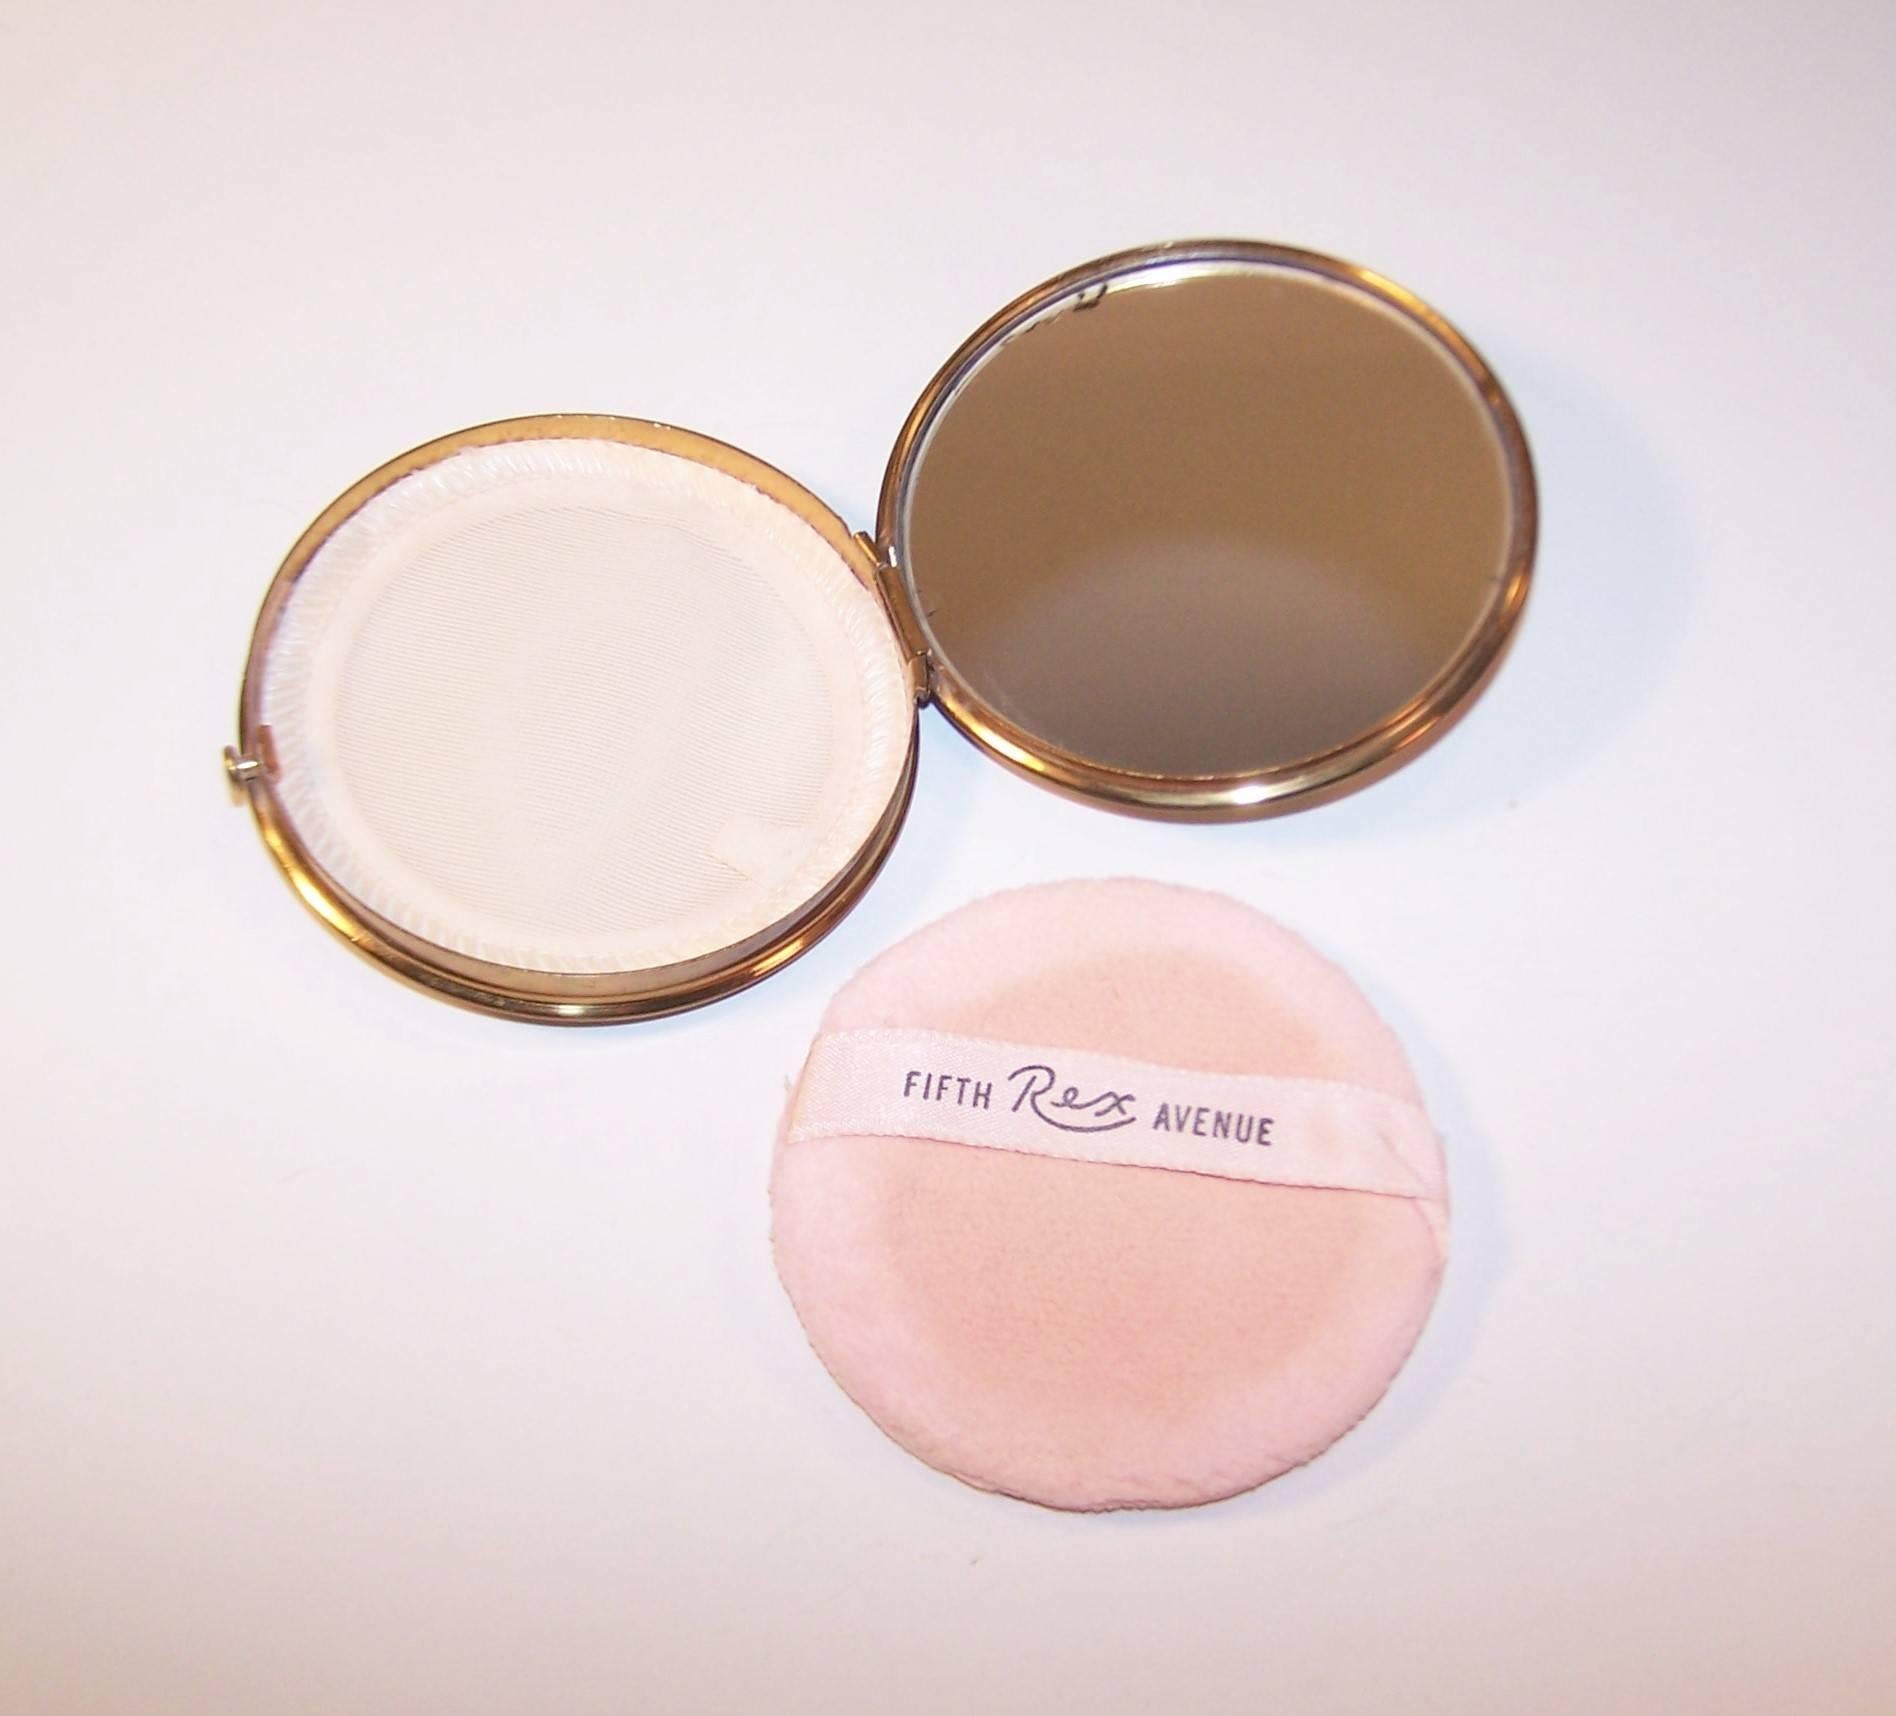 Rex Fifth Avenue was notably famous for utilizing colors in their designs.  This 1950's confectionery mirrored powder compact is a whimsical example of their work with a fabric decorated lid featuring silk satin stripes in pastel shades worthy of a